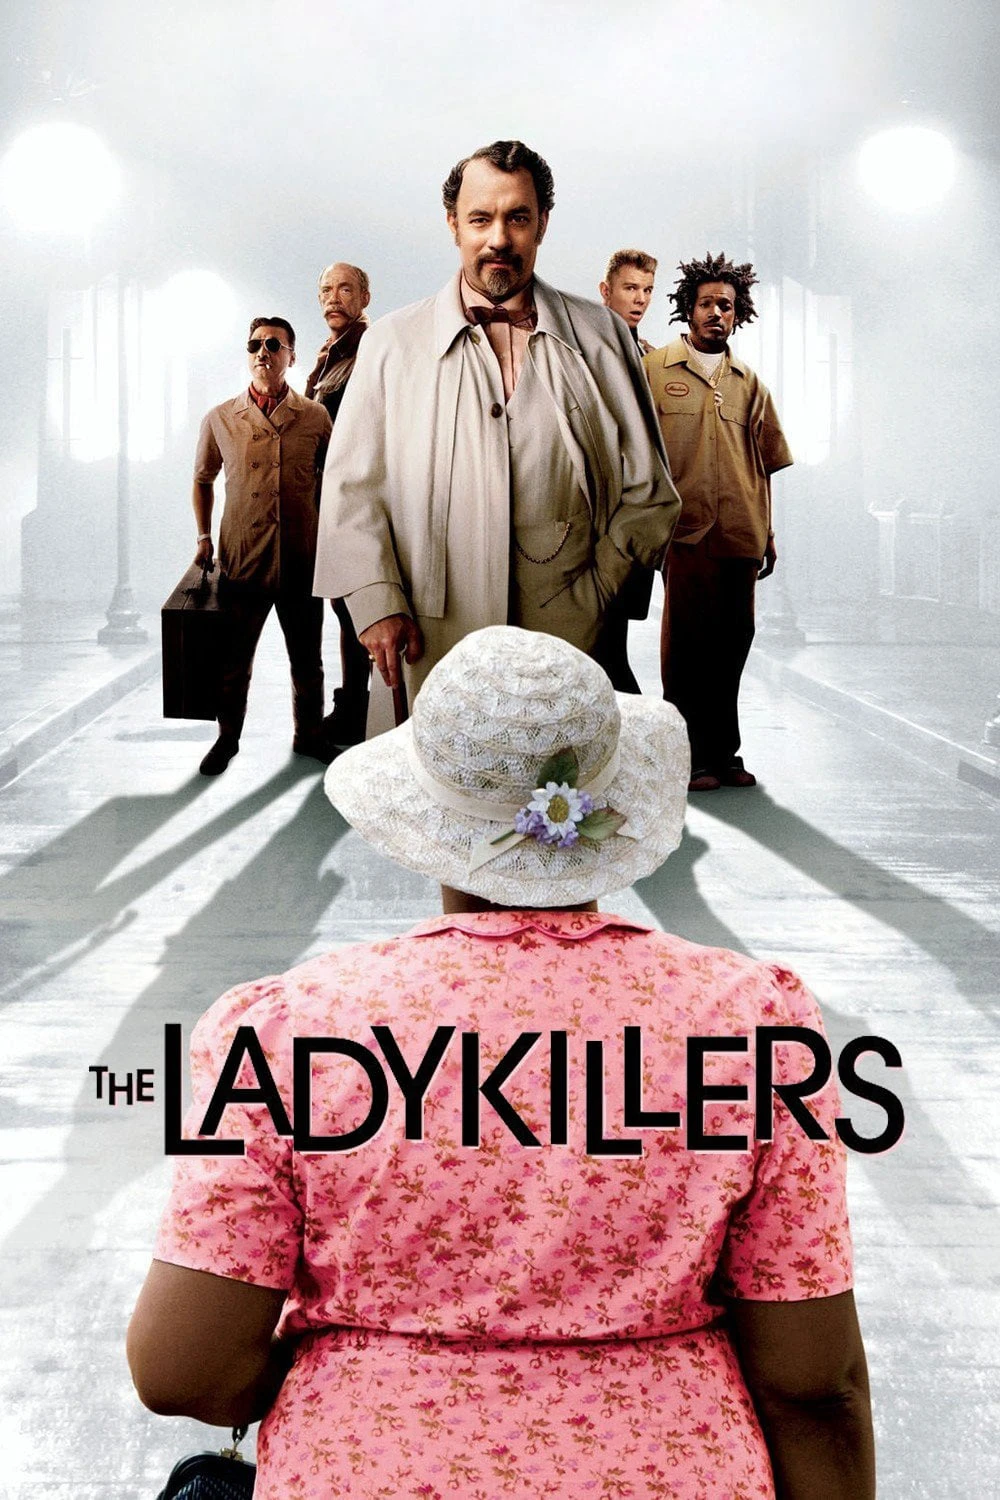 The Ladykillers | The Ladykillers (2004)